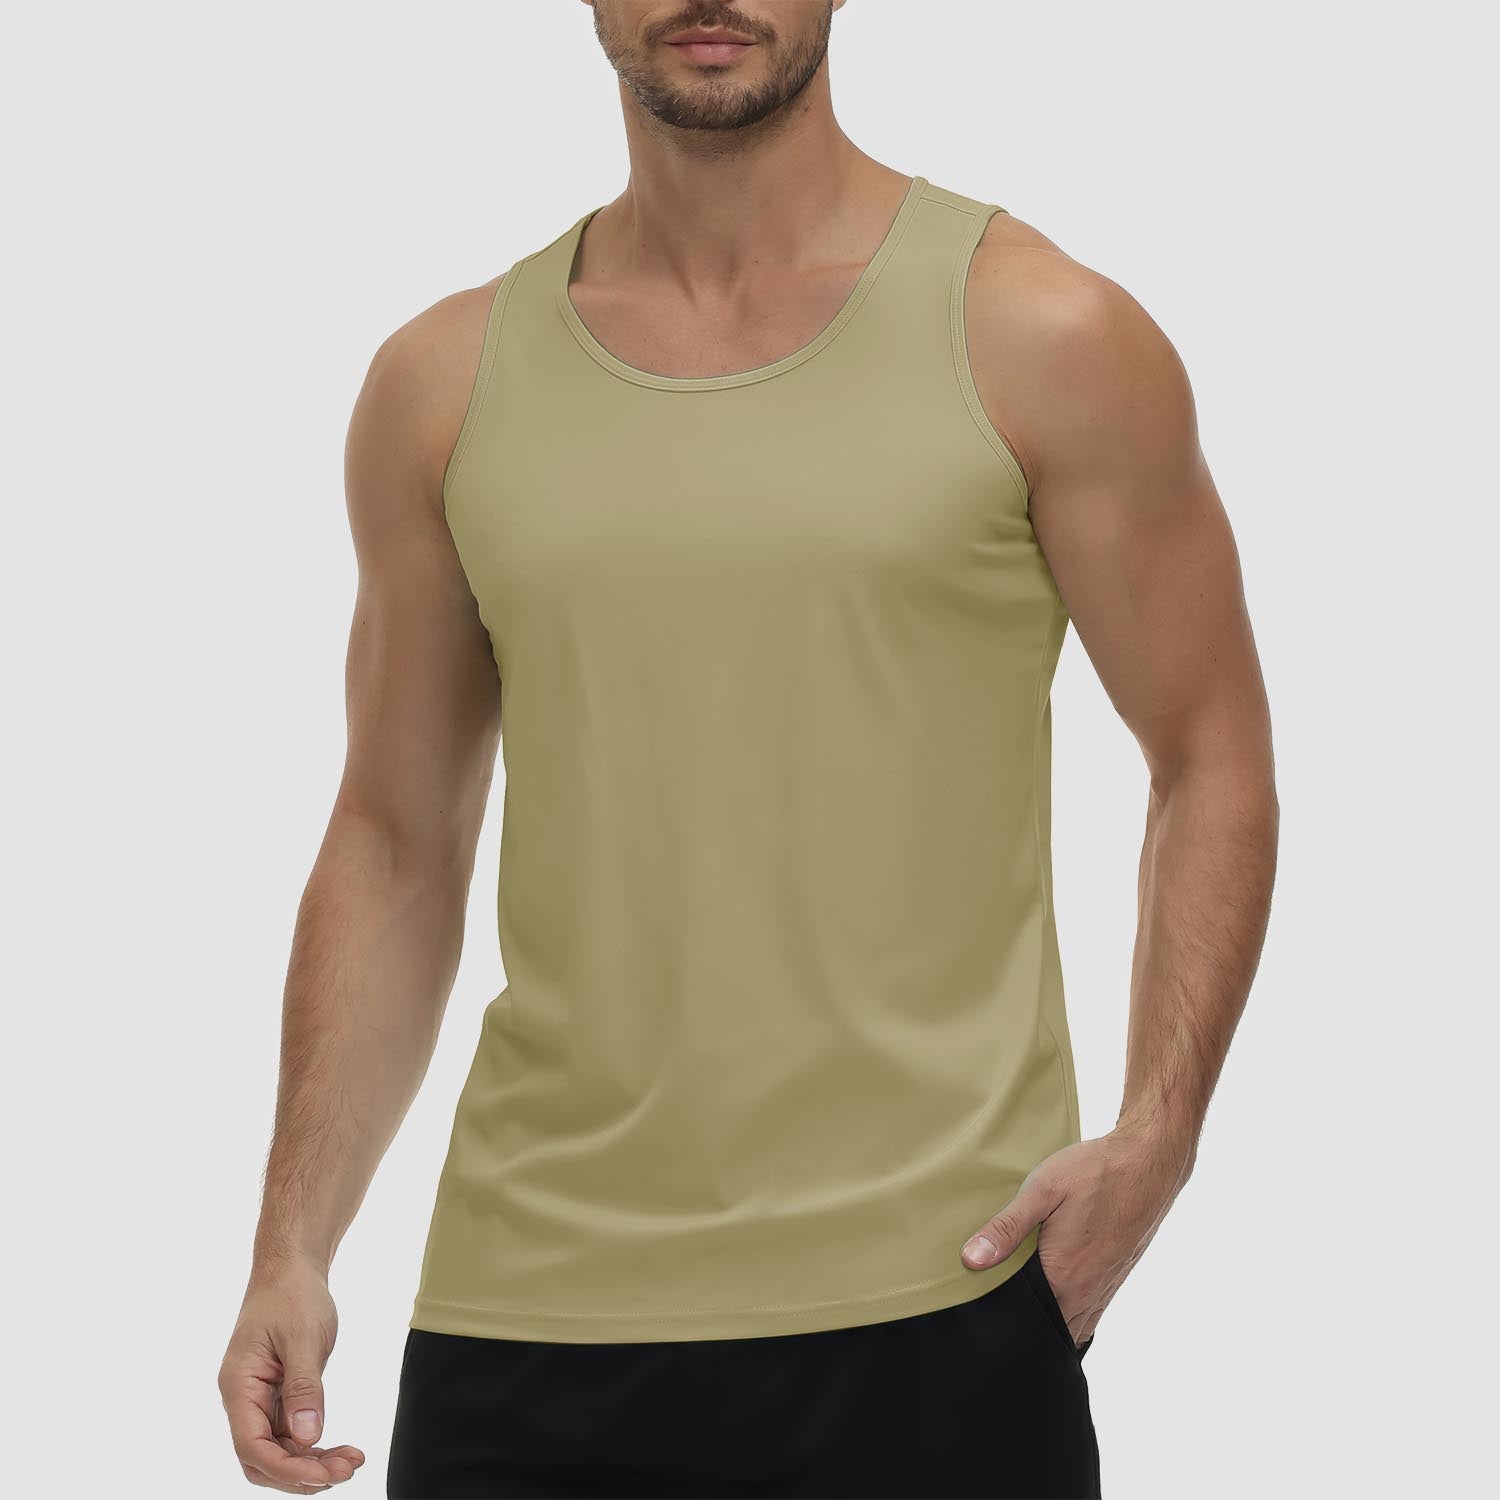 Men's Tank Top UPF 80+ Sun Protection Quick Dry Stretchy Athletic Sleeveless Shirts for Workout Training